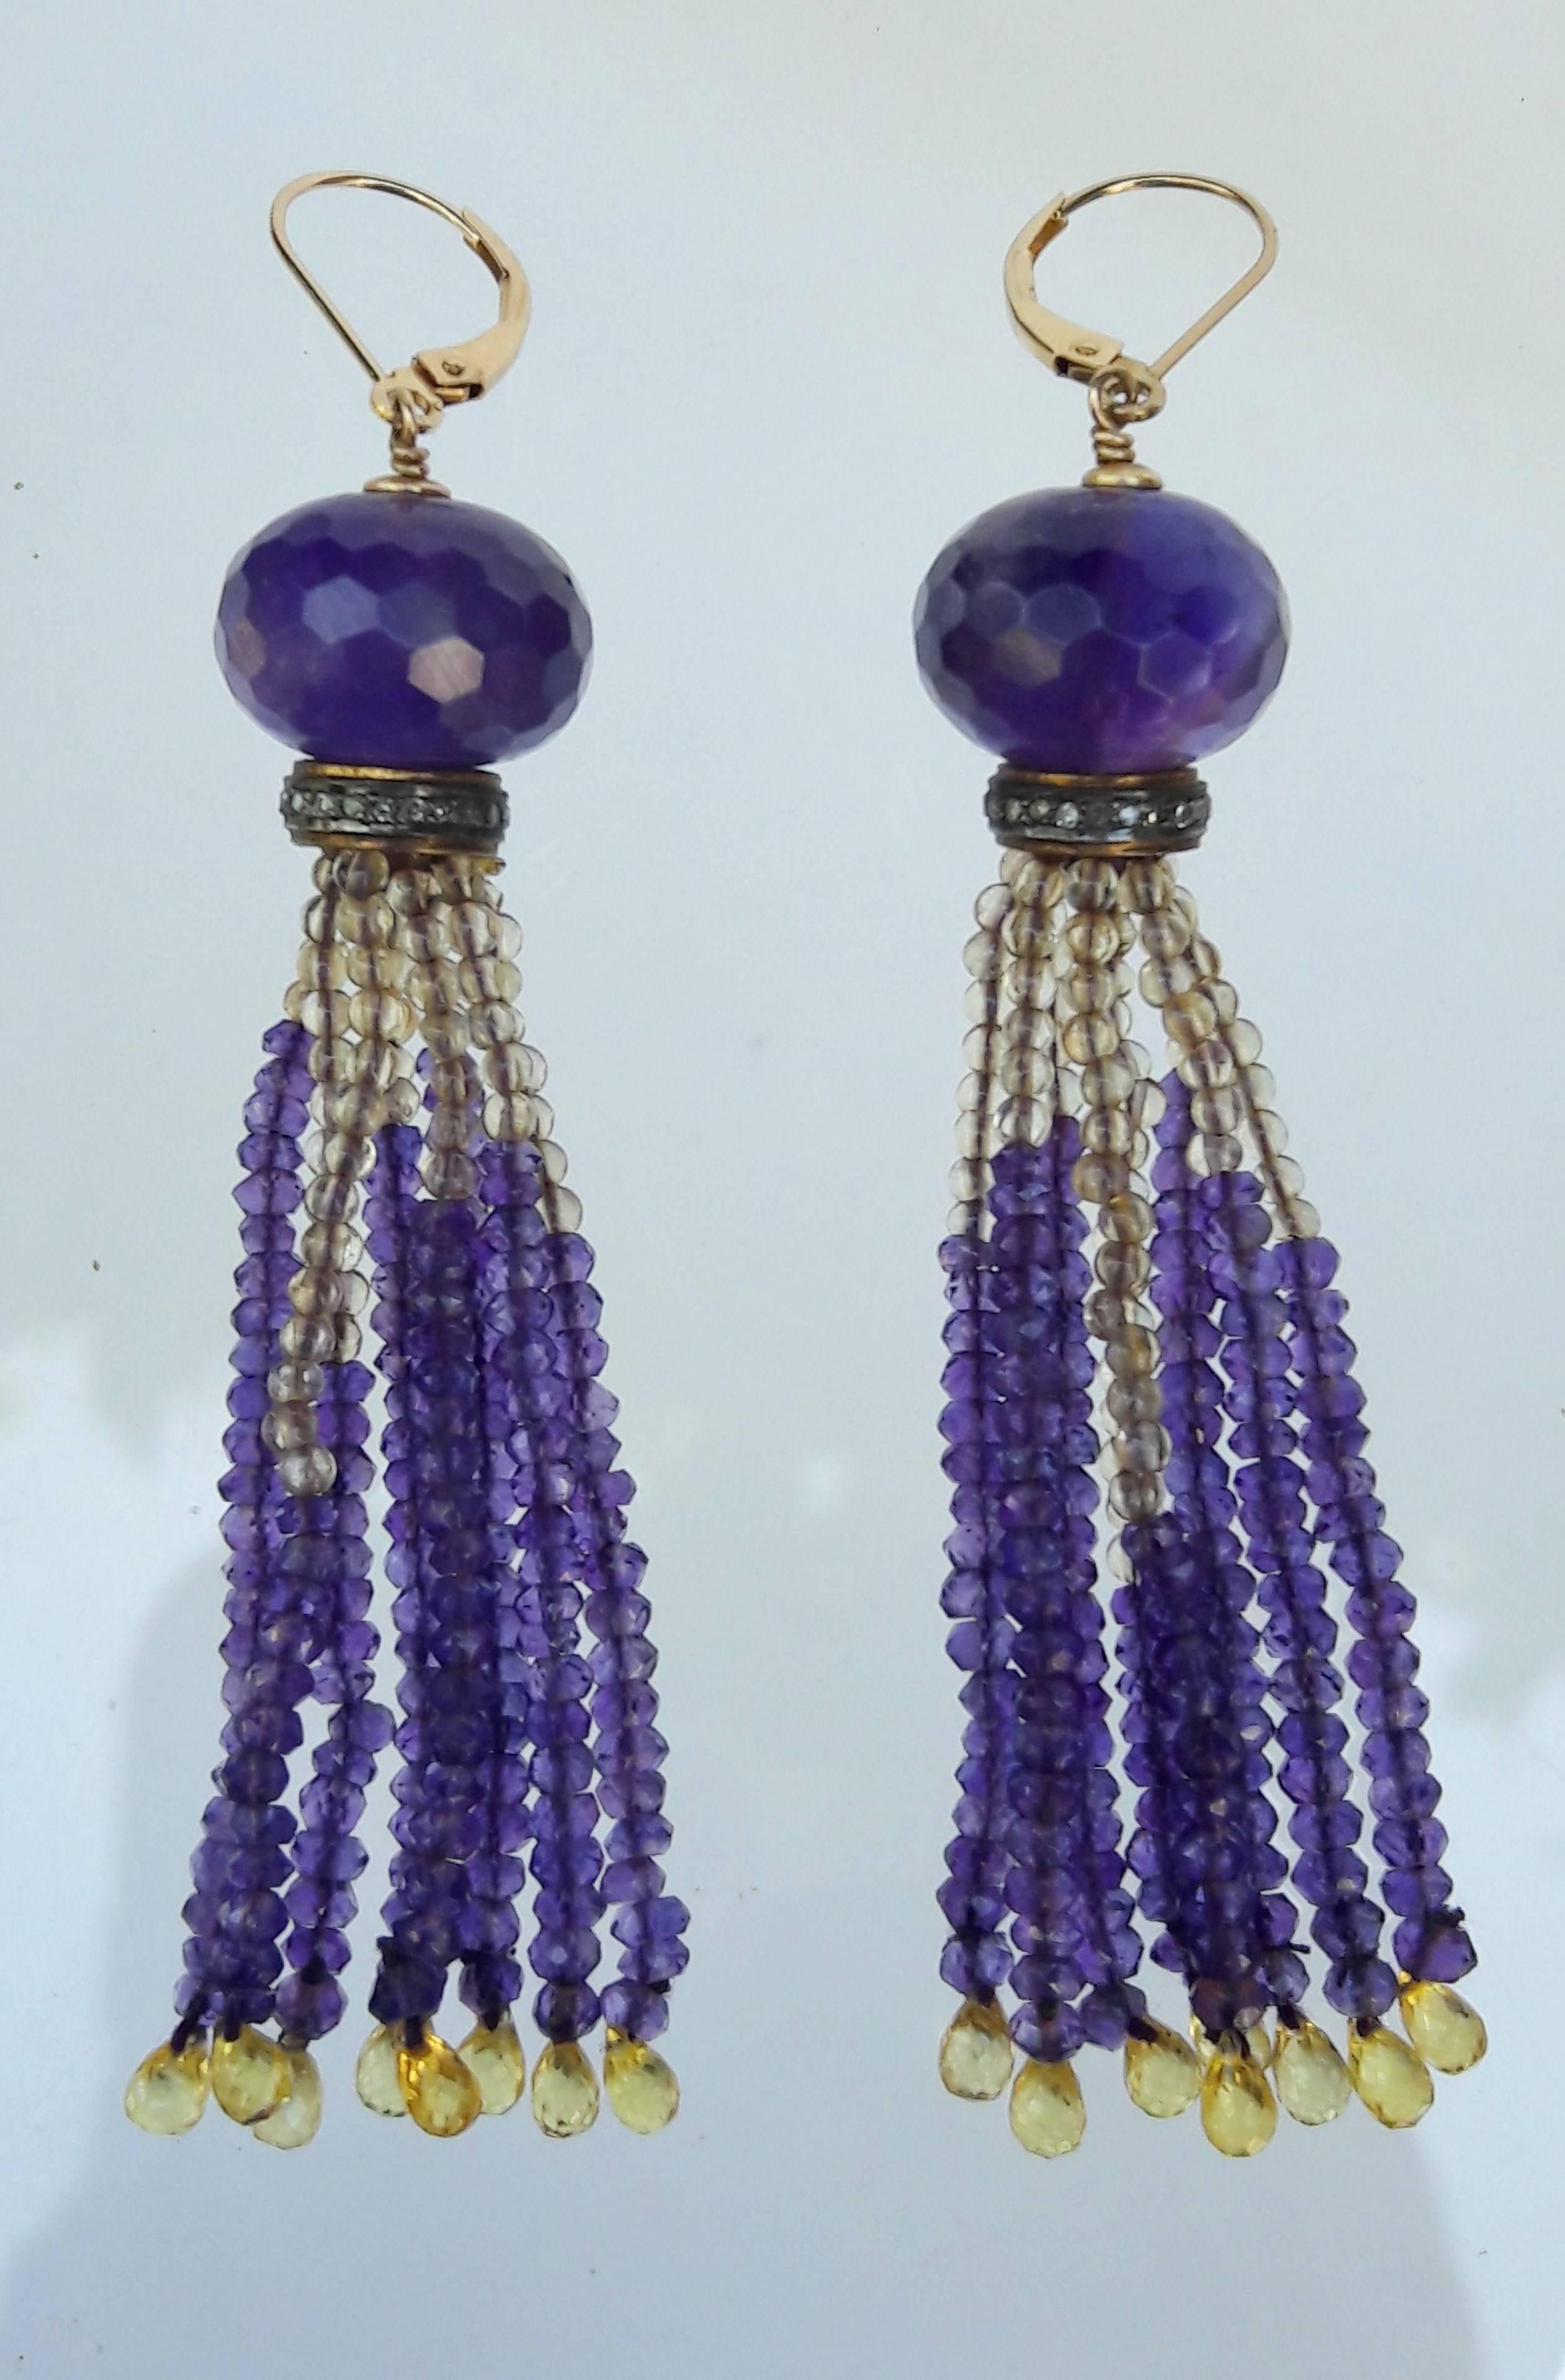 Strands are made of faceted amethyst and round citrine beads measuring approximately 2 mm each. Each strand tapers with a delicate and fine citrine briolette. The tassel strands hang from a detailed 14 k gold, silver and diamond rondelle topped with